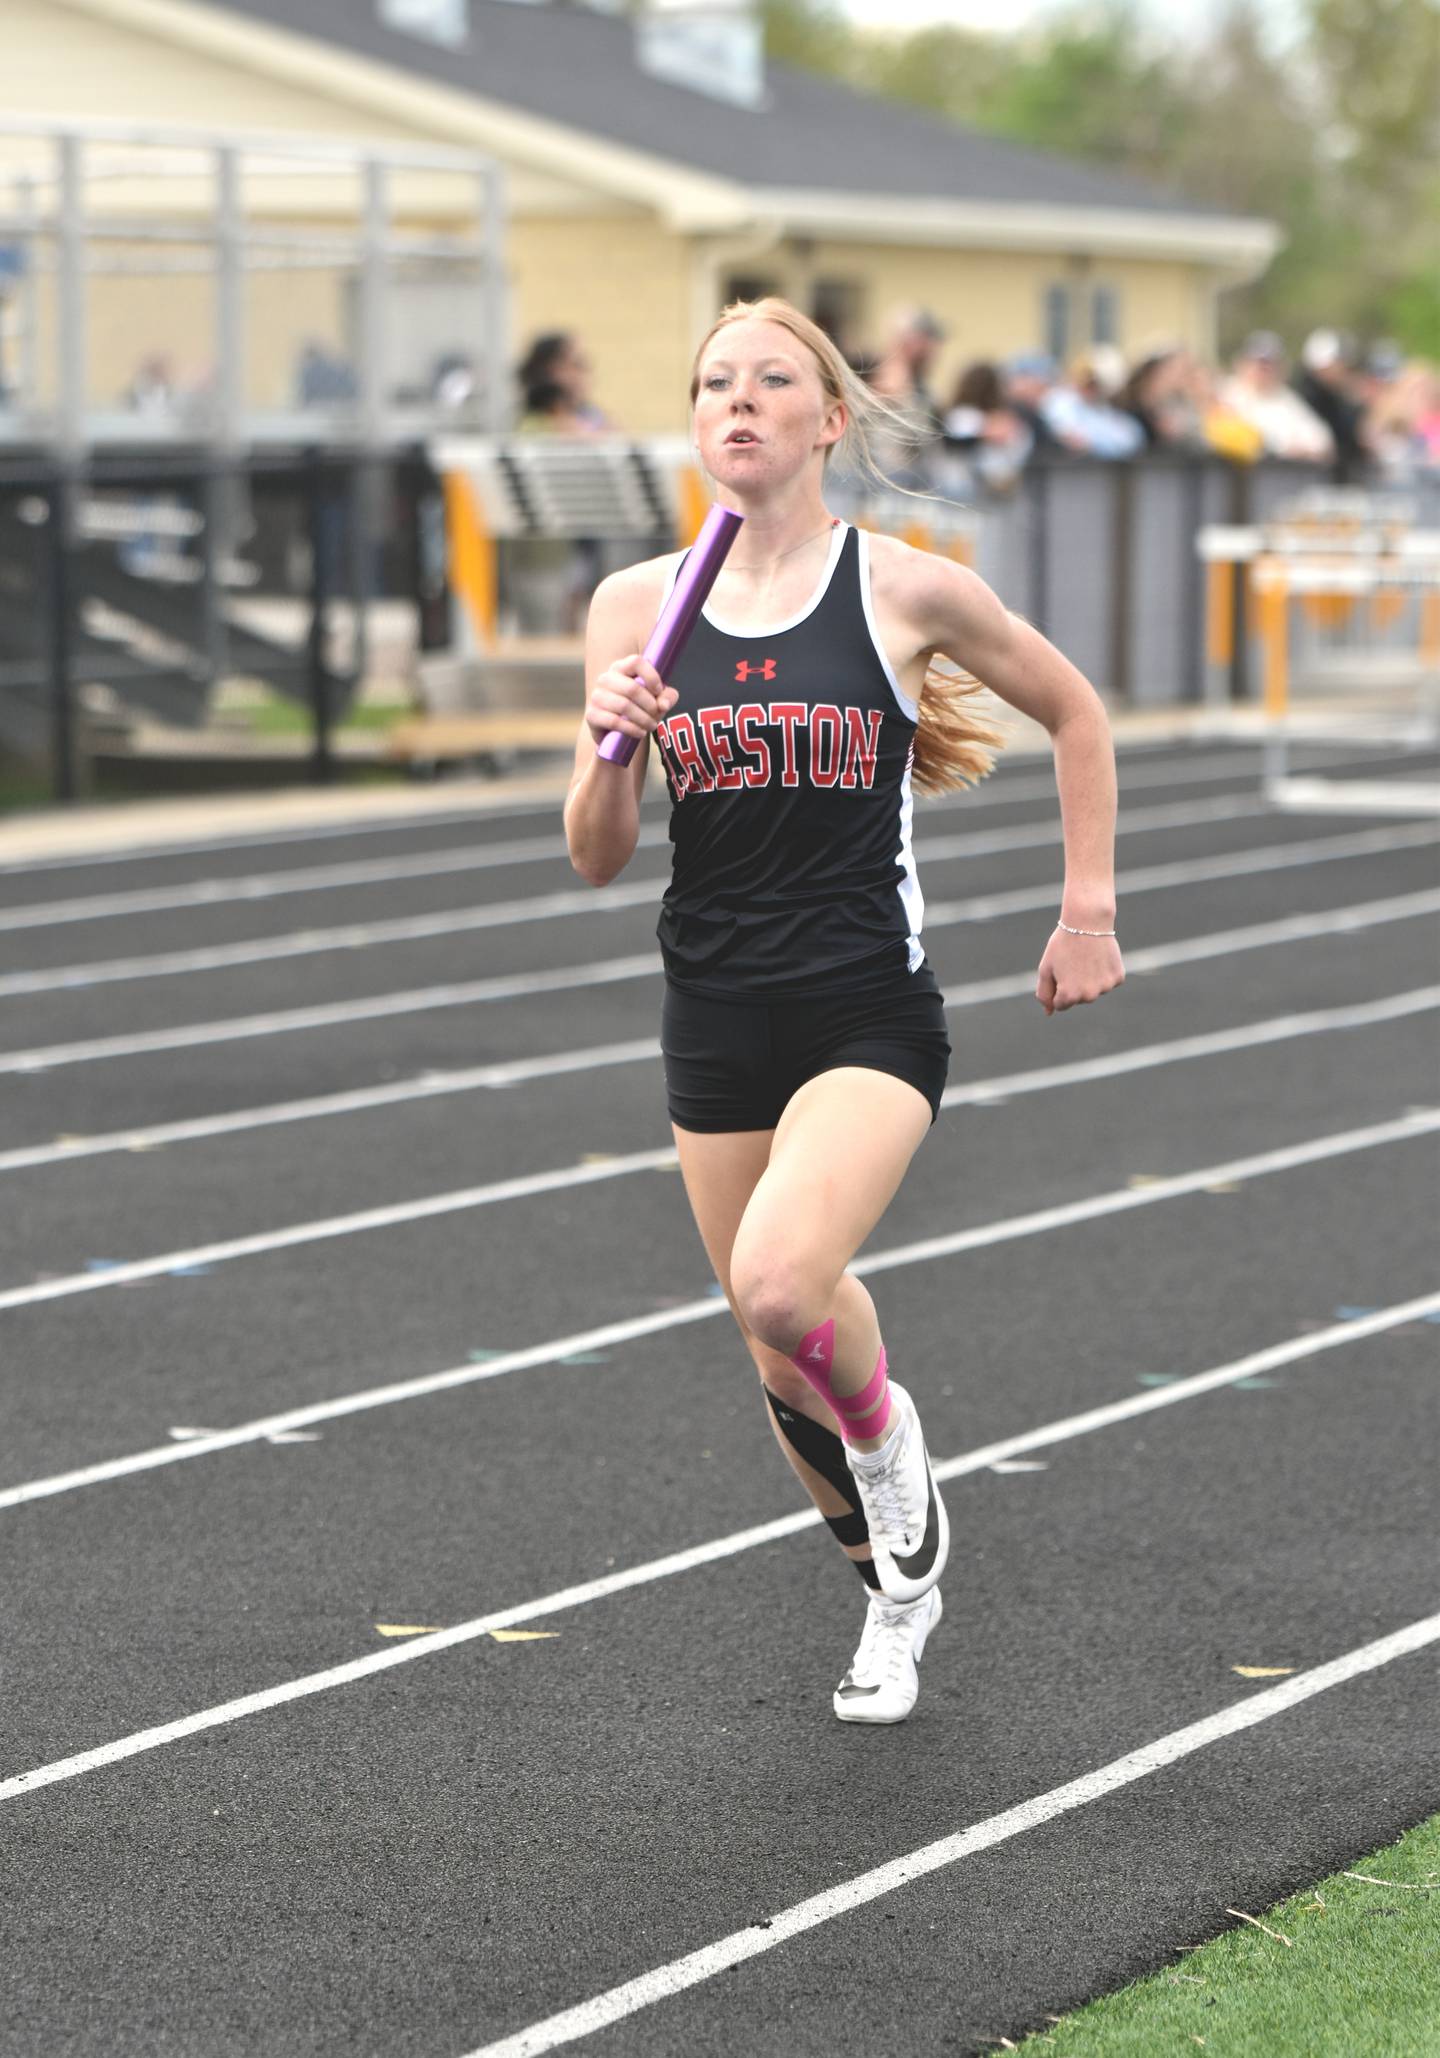 Avery Staver runs the third leg of the 4x800m relay. She qualified in both the relay and the 200m dash.